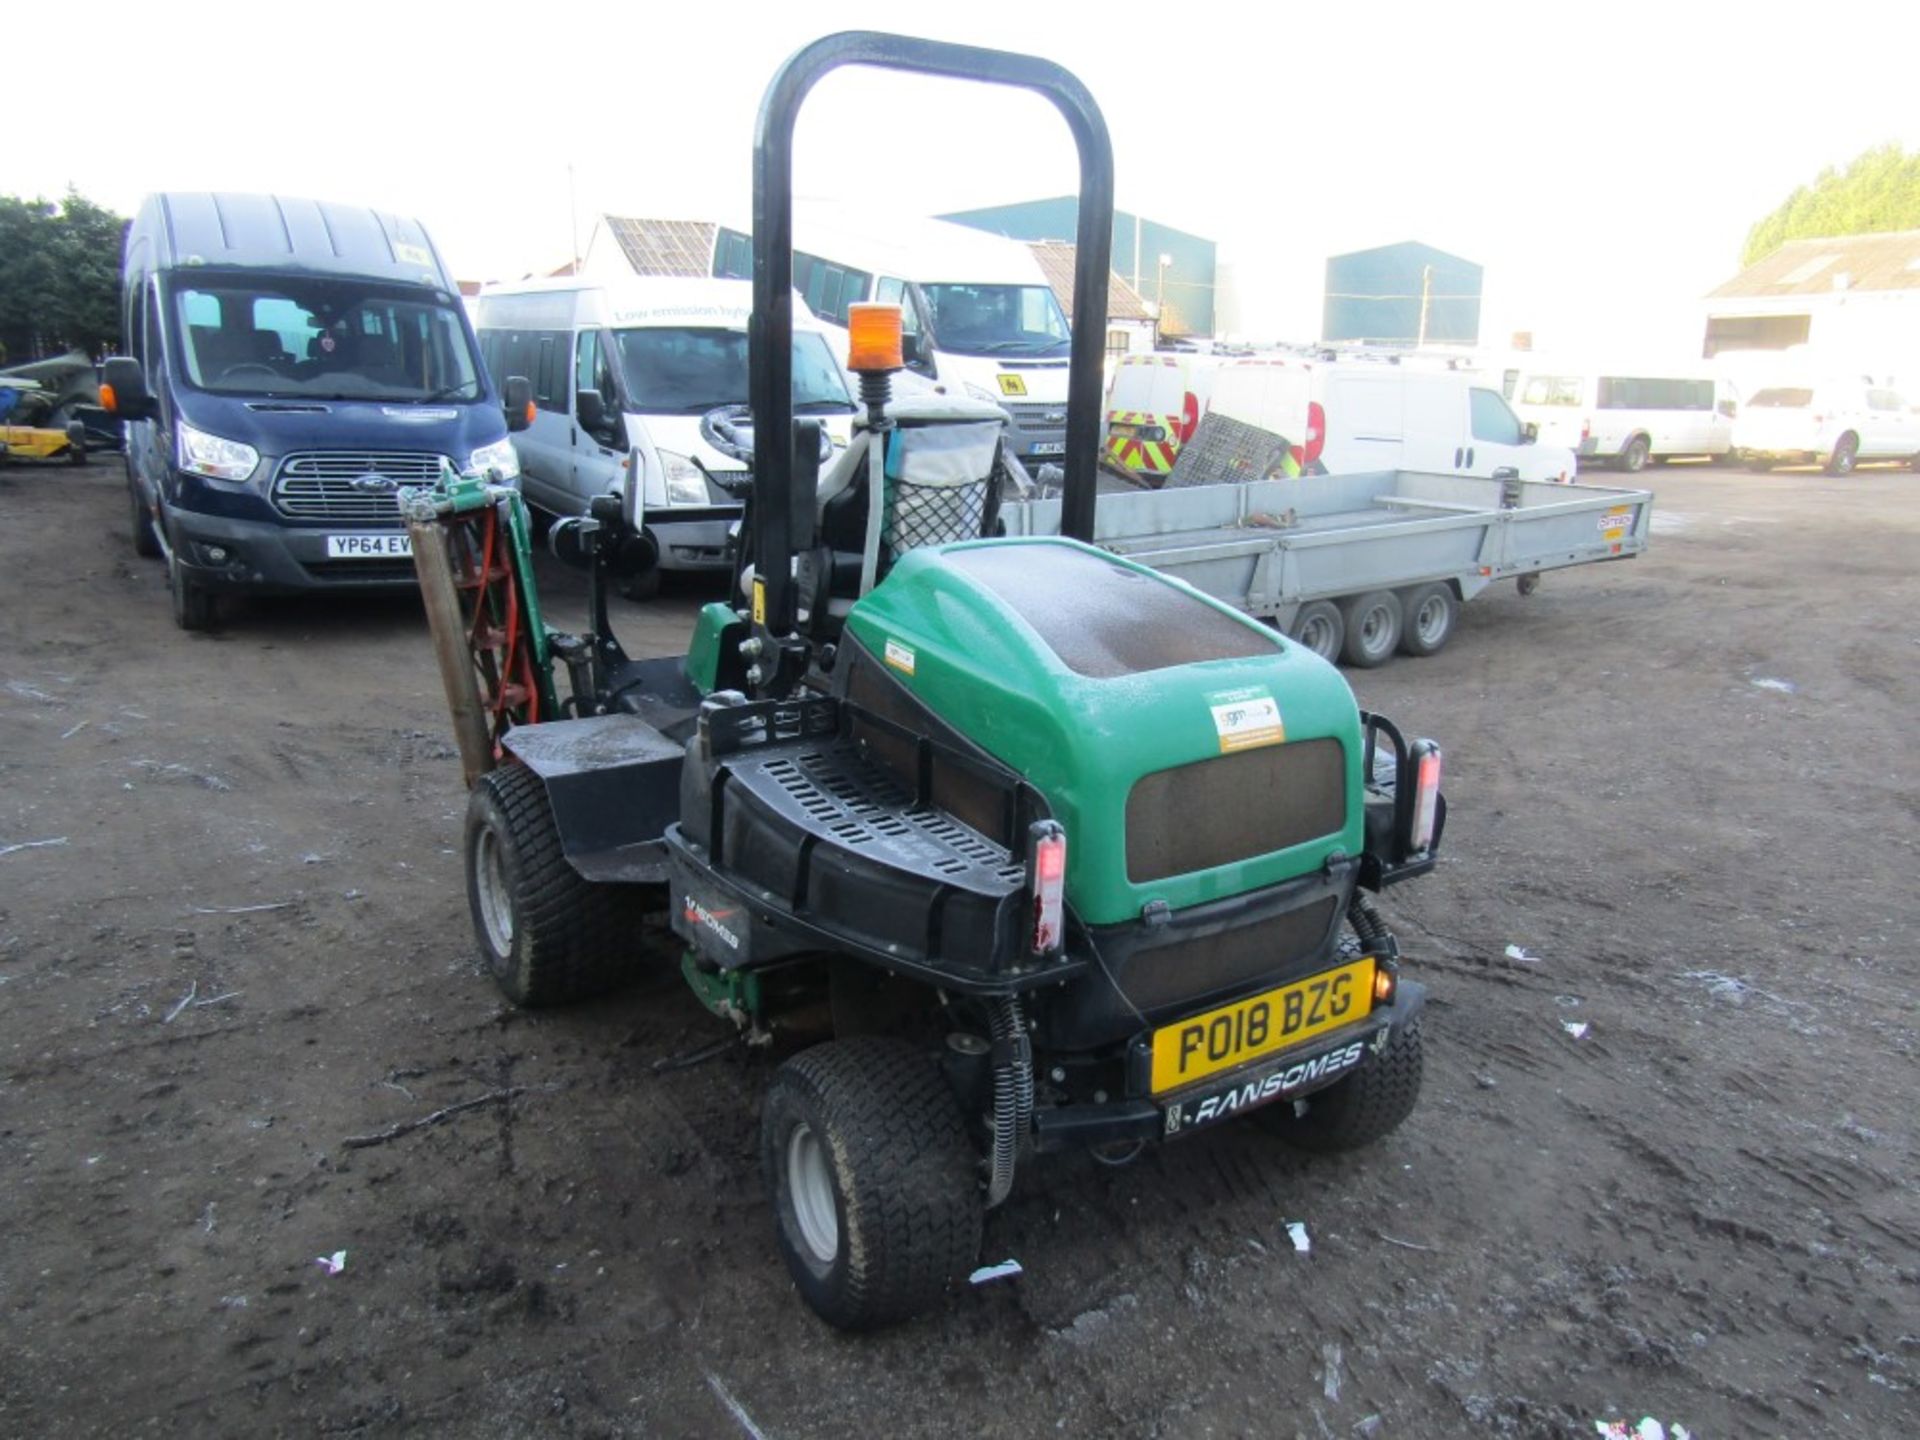 18 reg RANSOMES PARKWAY 3 TRIPLE RIDE ON MOWER (DIRECT COUNCIL) 1ST REG 05/18, 223 HOURS - Image 3 of 5